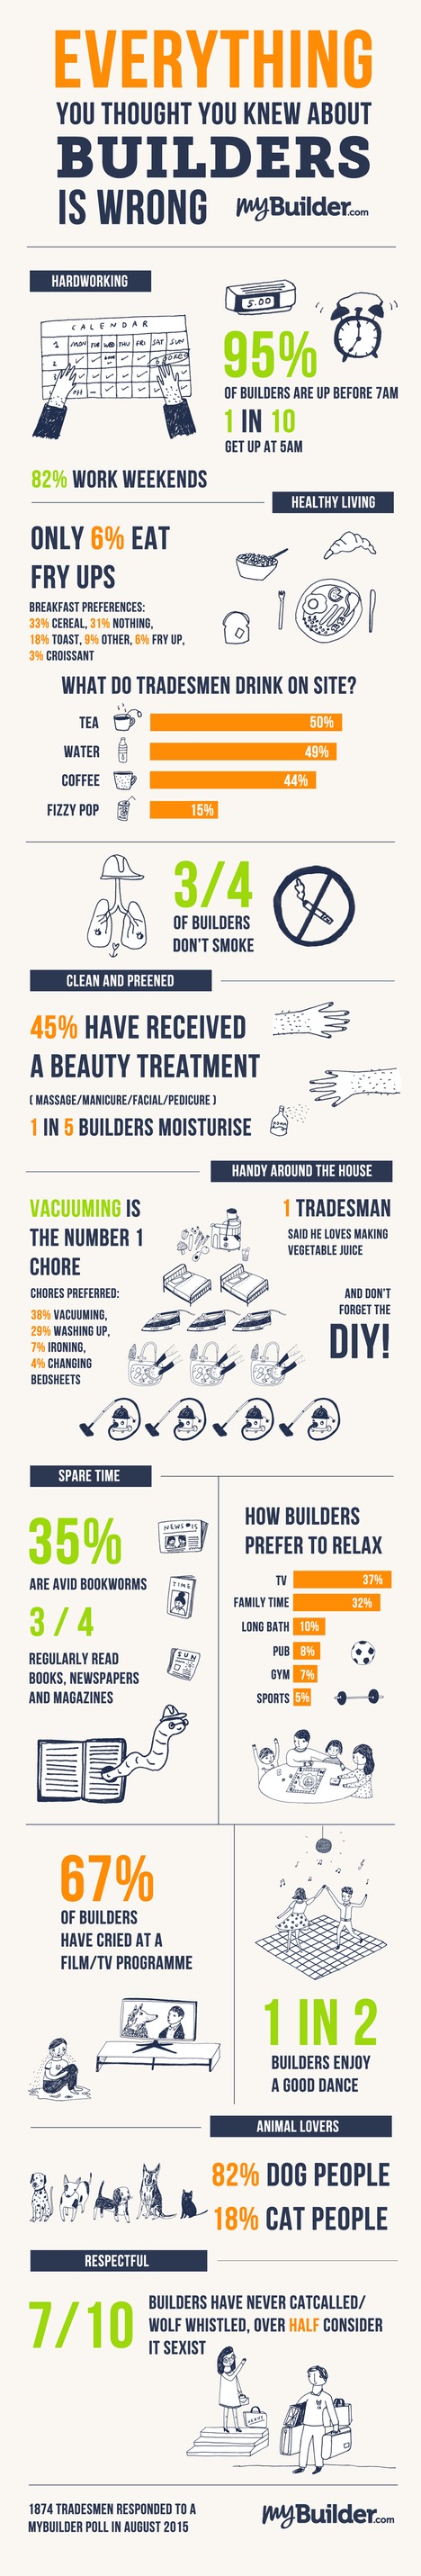 Everything You Thought You Knew About Builders is Wrong